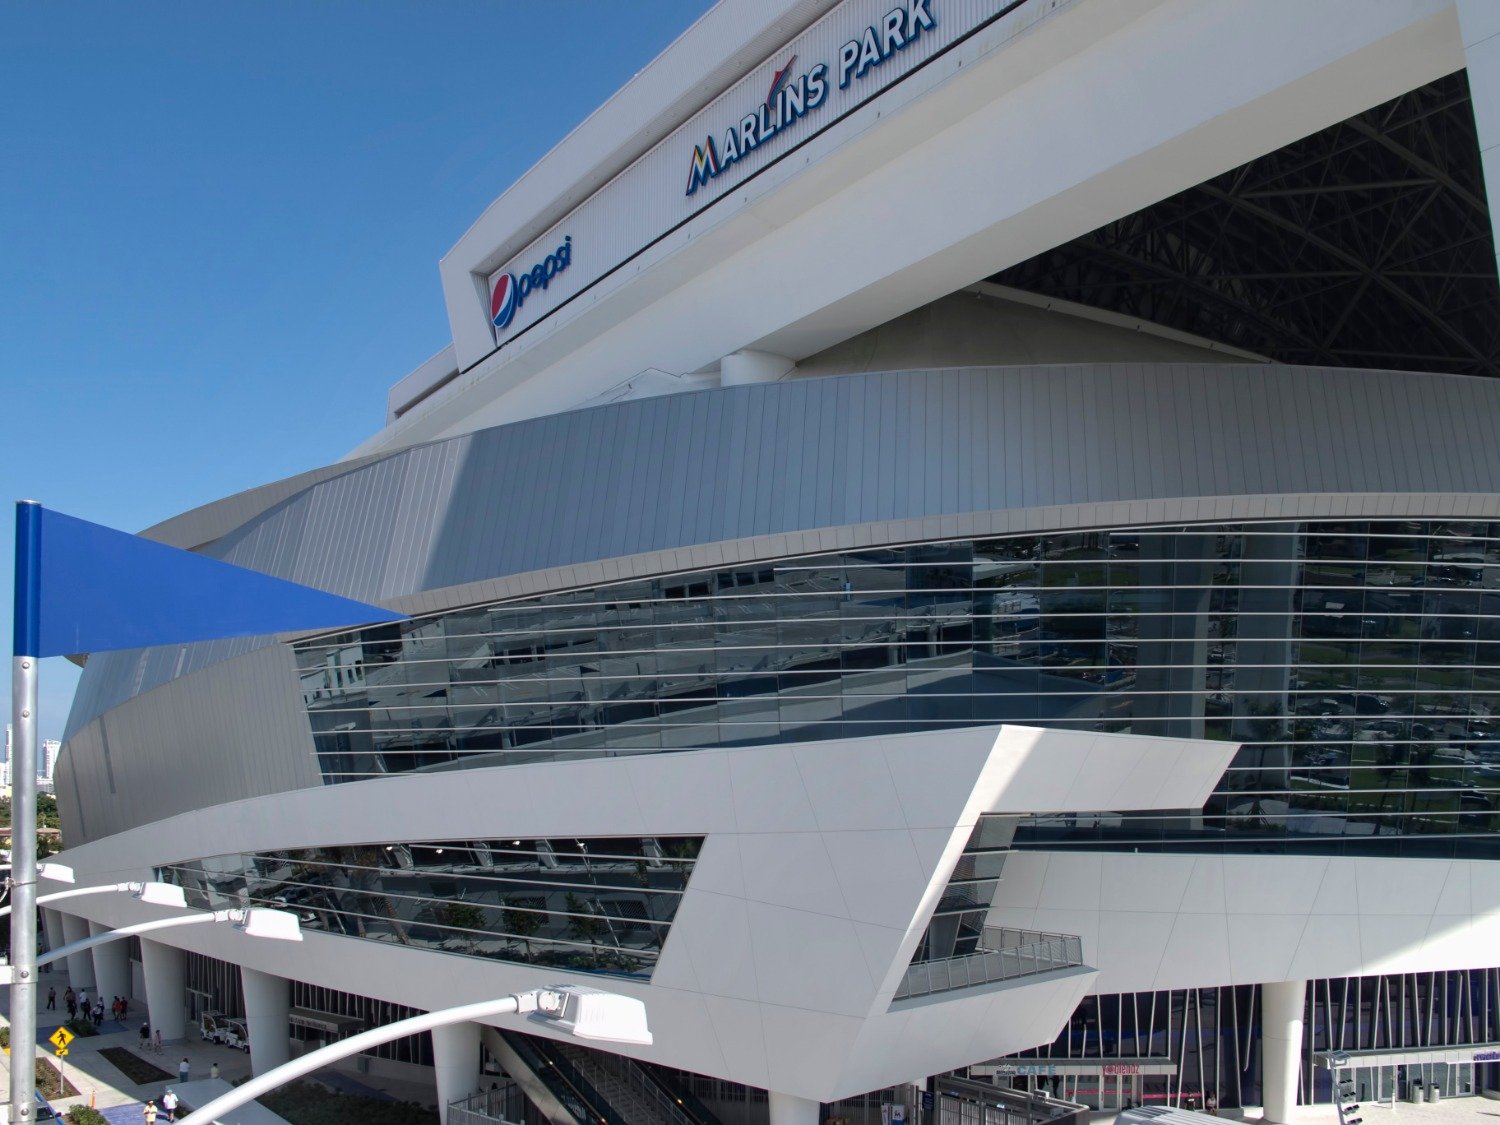 The 300s Reviews: Marlins Park